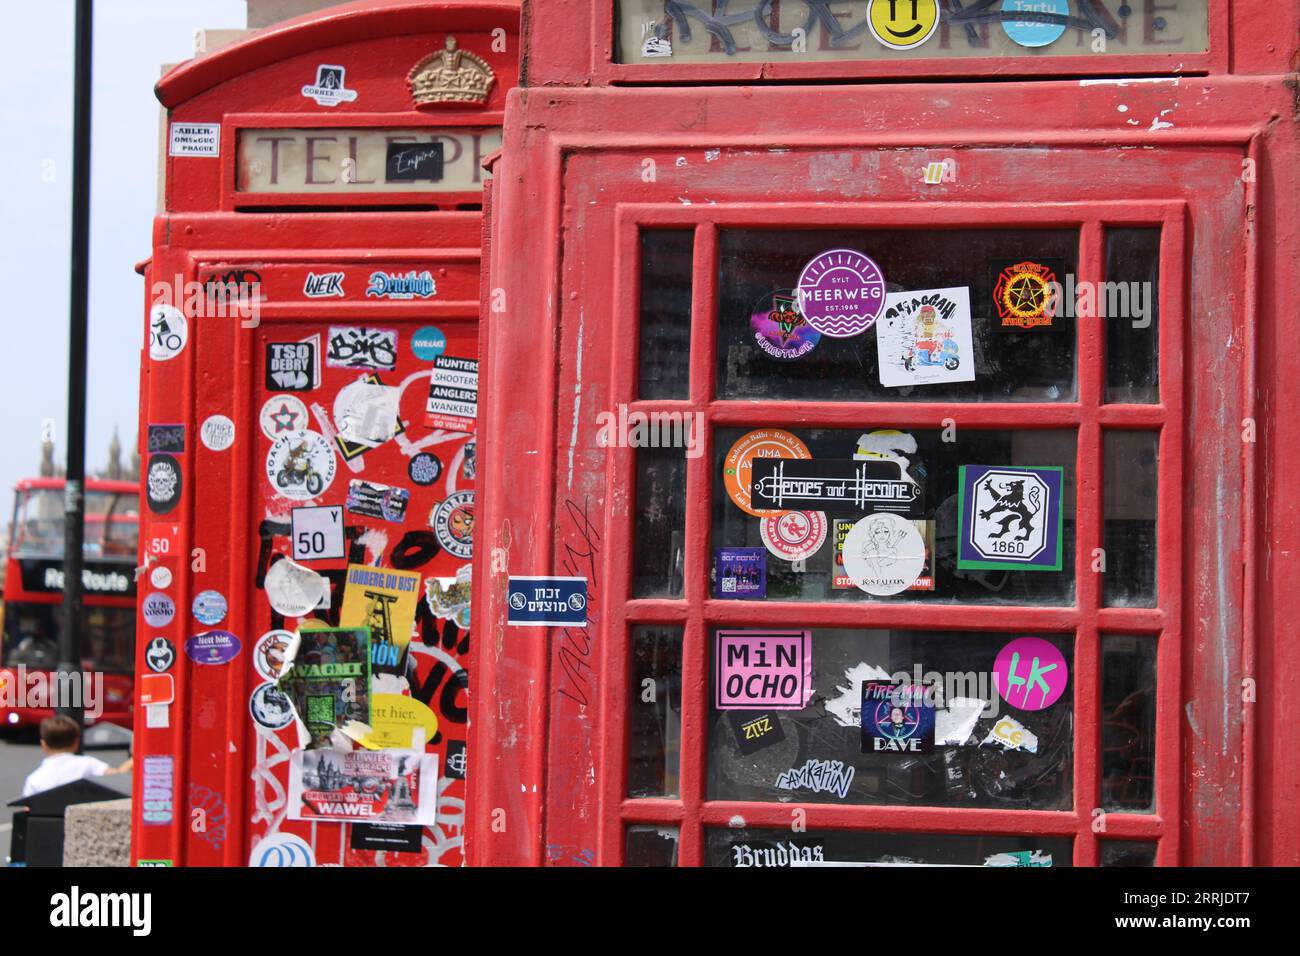 london red vintage telephone with a lot of stickers on it and a red bus in the background Stock Photo